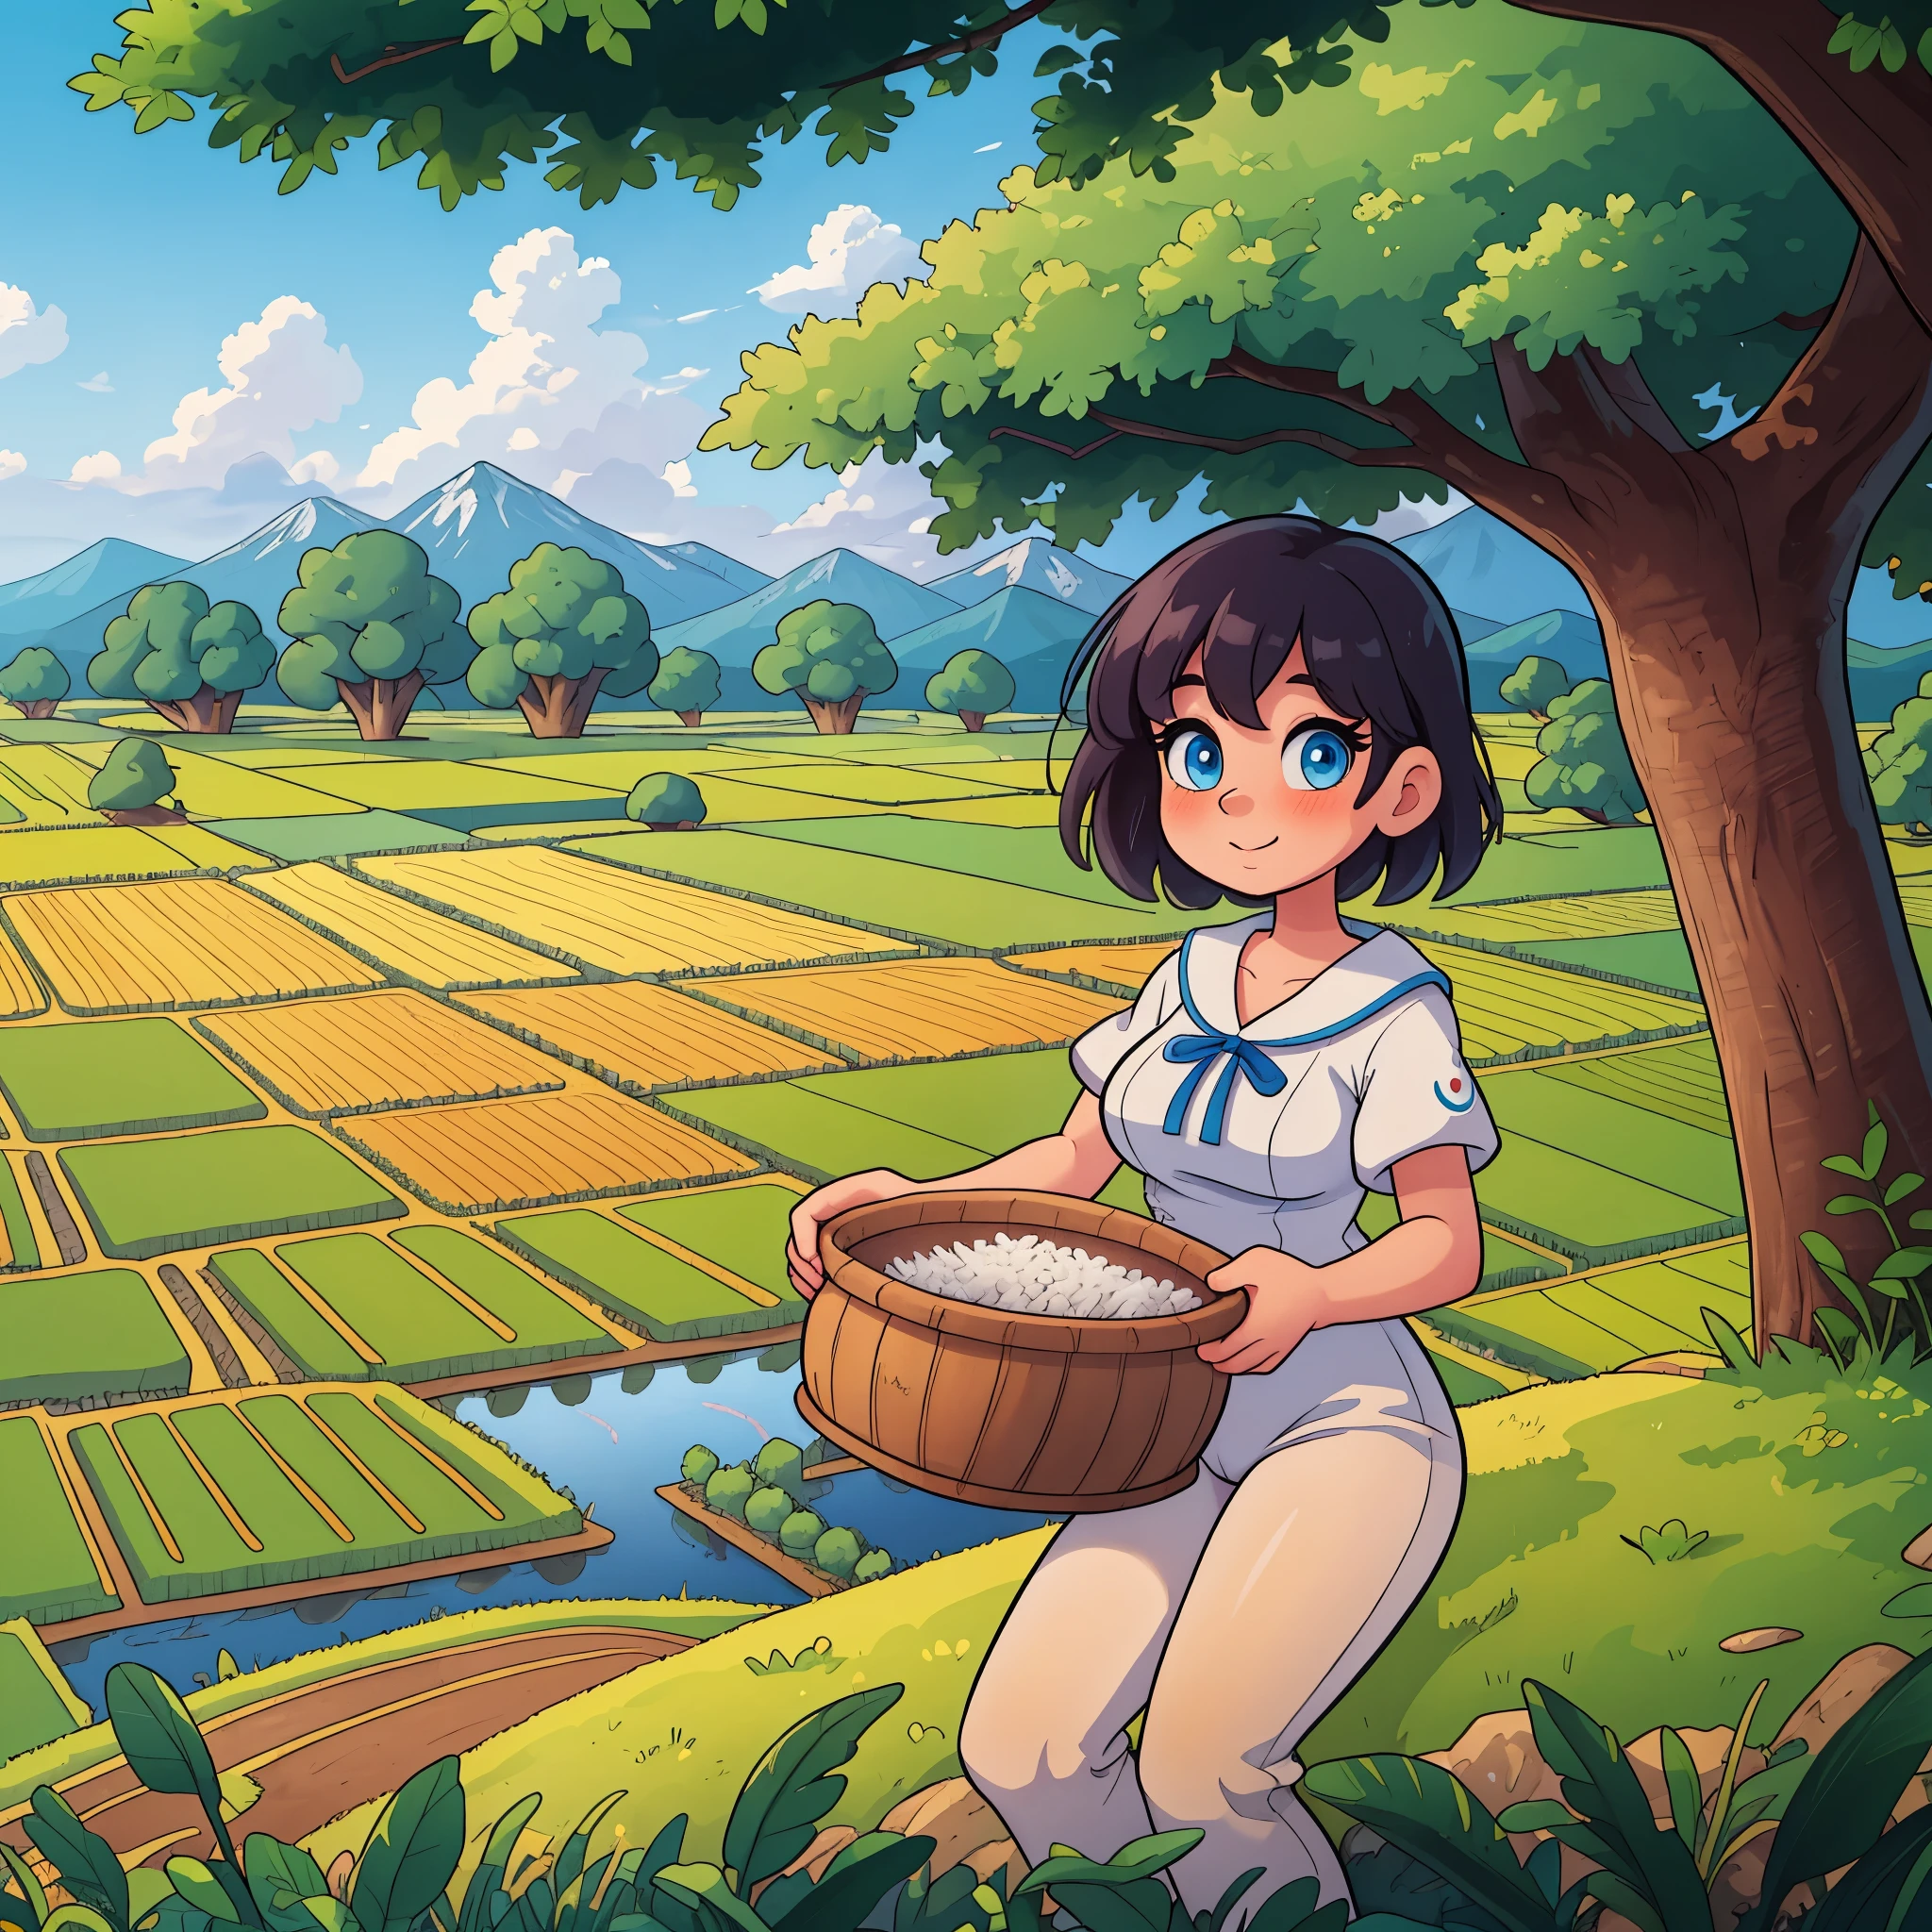 masterpiece, high quality, cartoon, girl in the rice field, white outfit, blue eyes, mountains, clouds, sky, tree